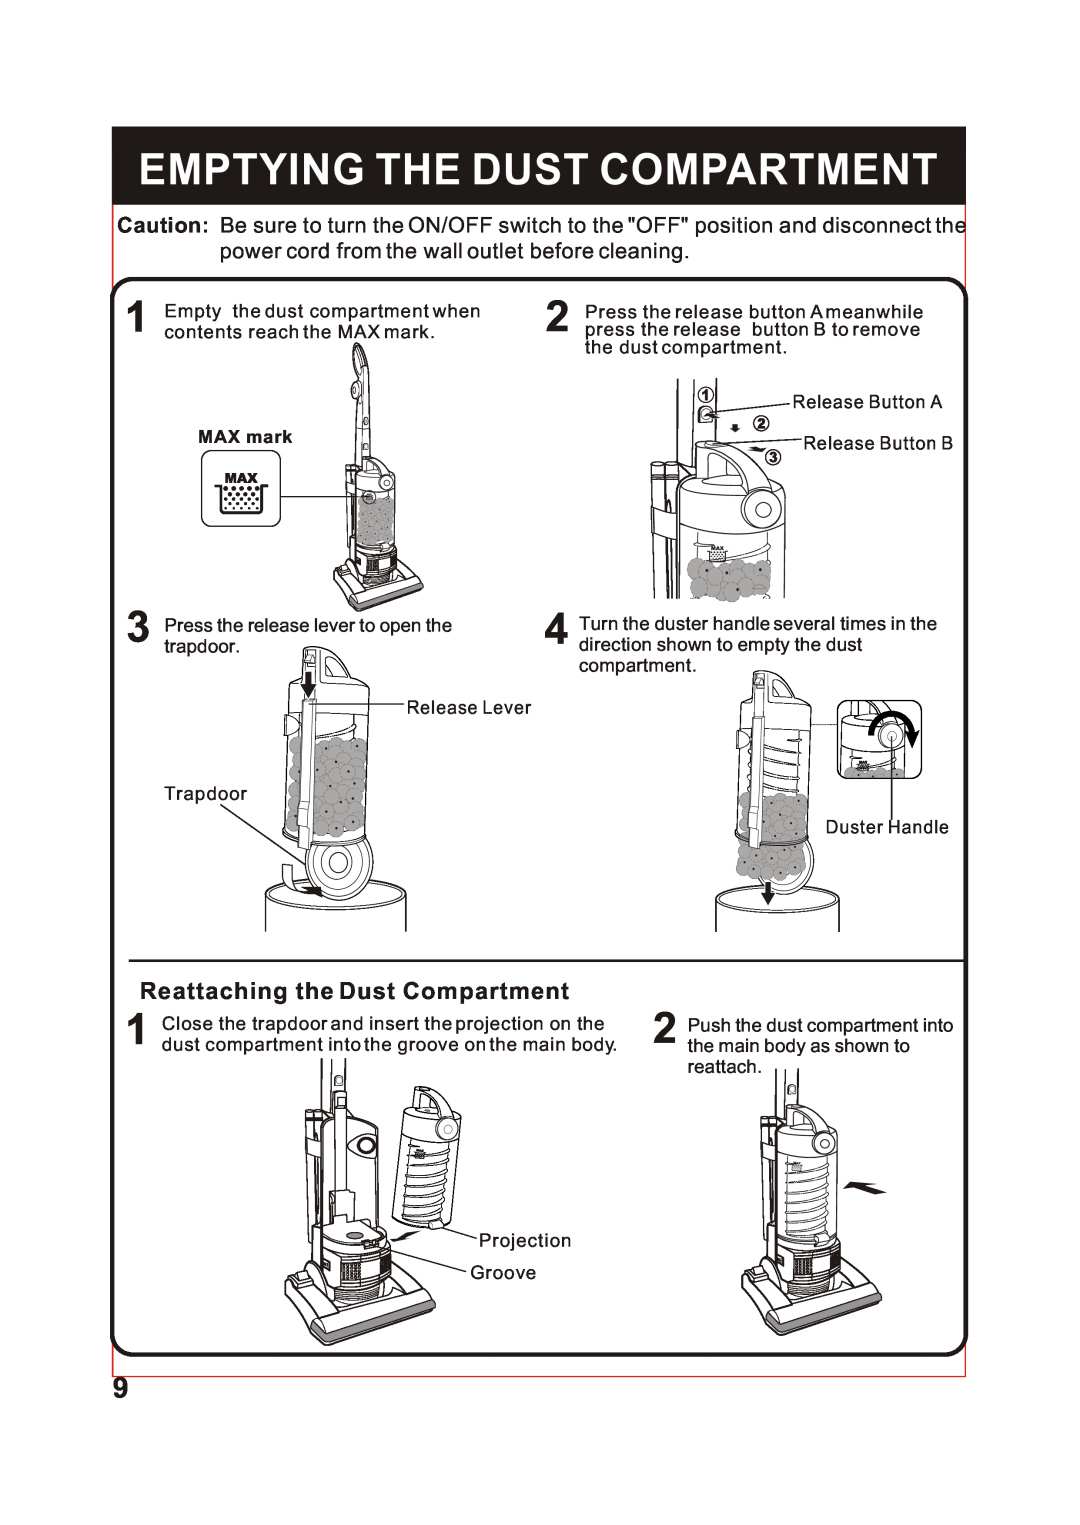 Fantom Vacuum FM741 instruction manual Emptying The Dust Compartment, power cord from the wall outlet before cleaning 